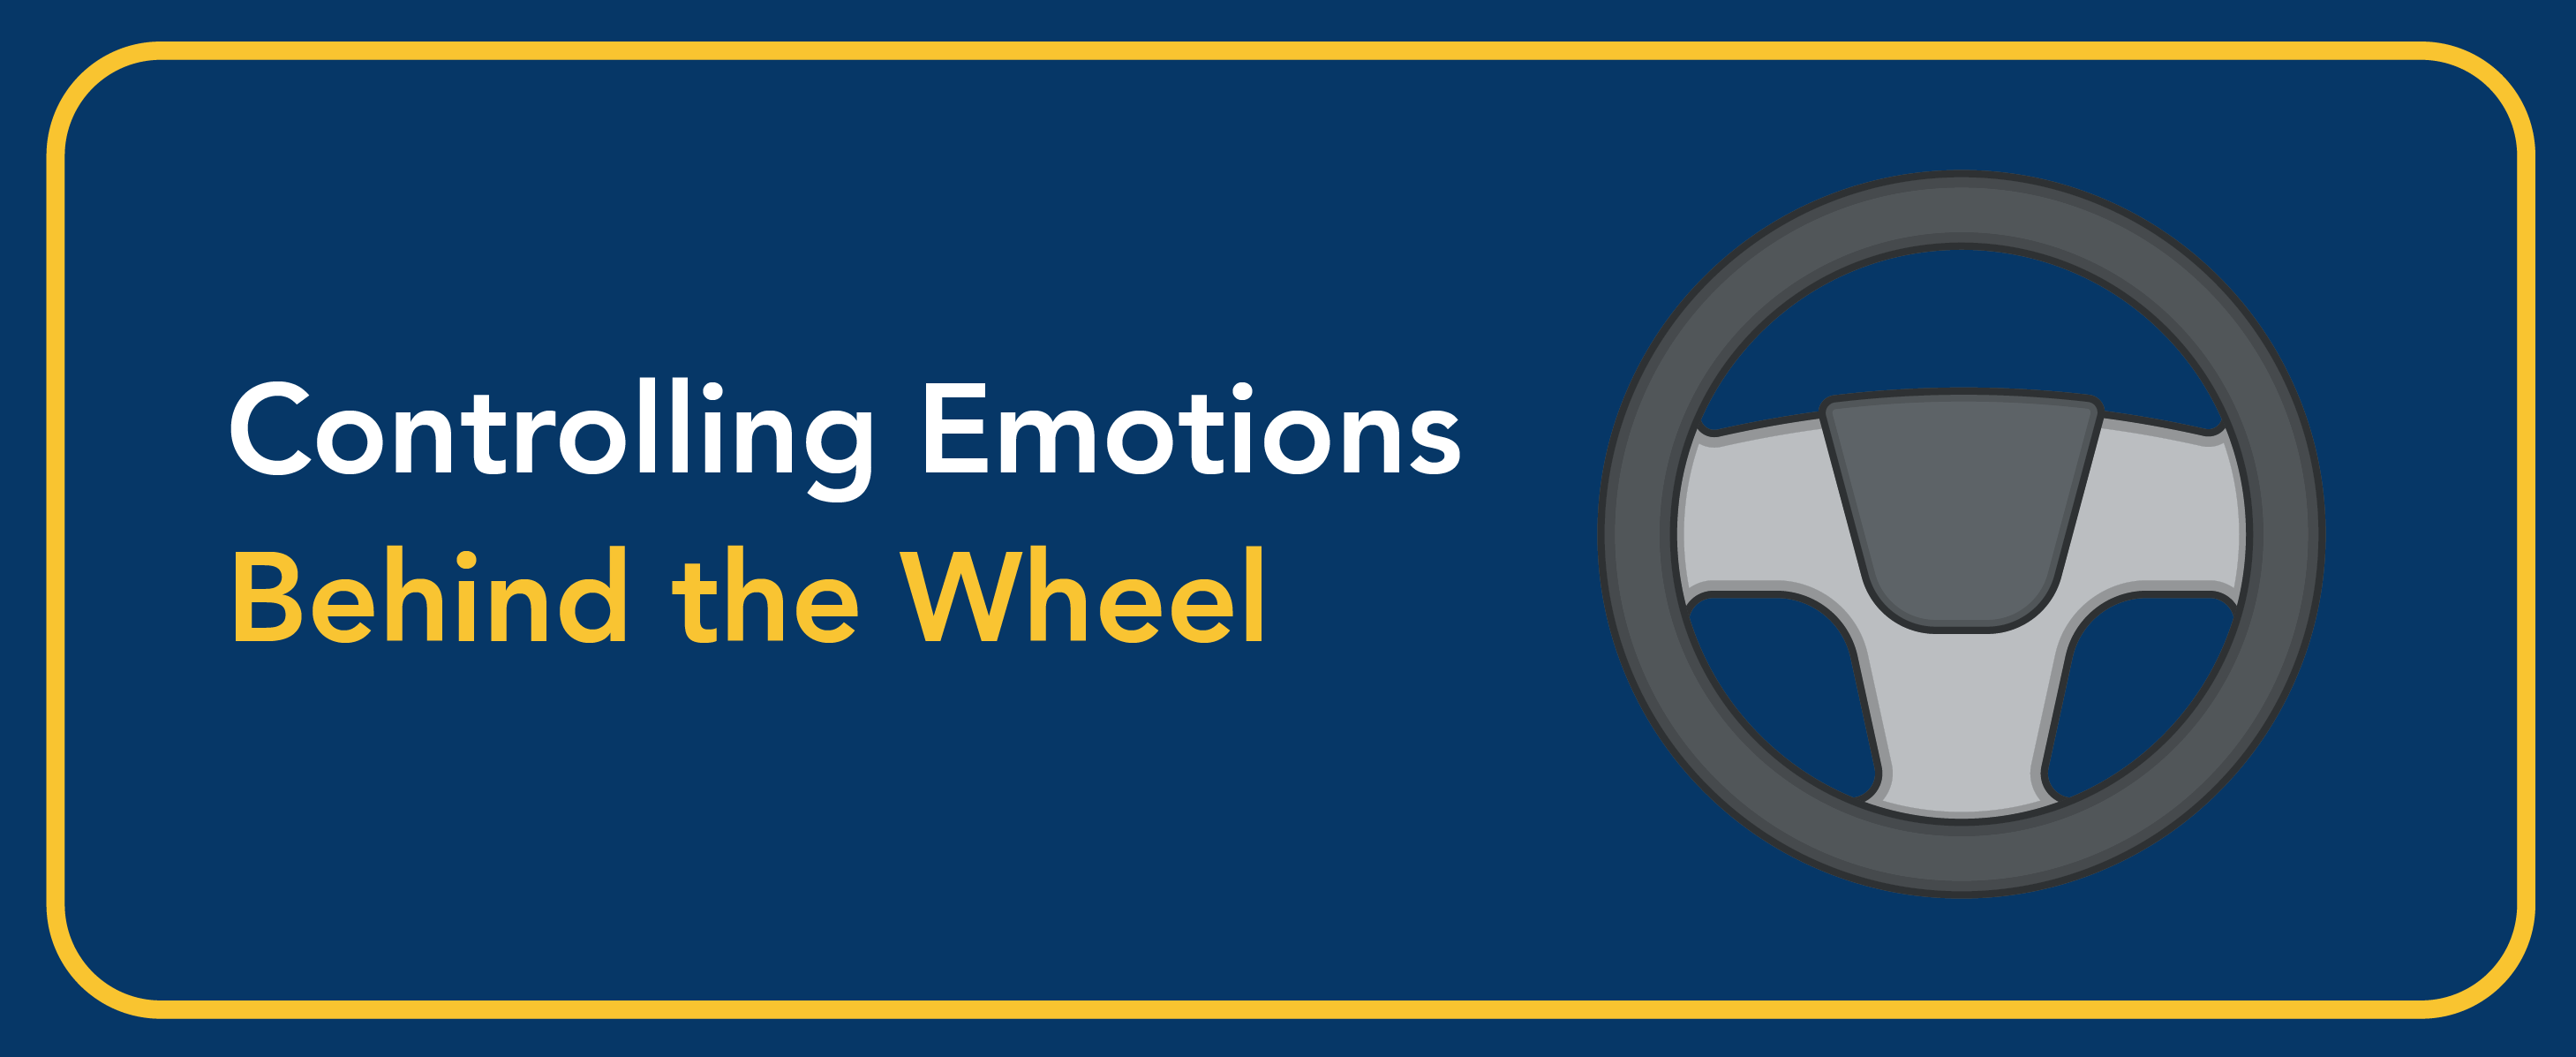 Controlling emotions behind the wheel